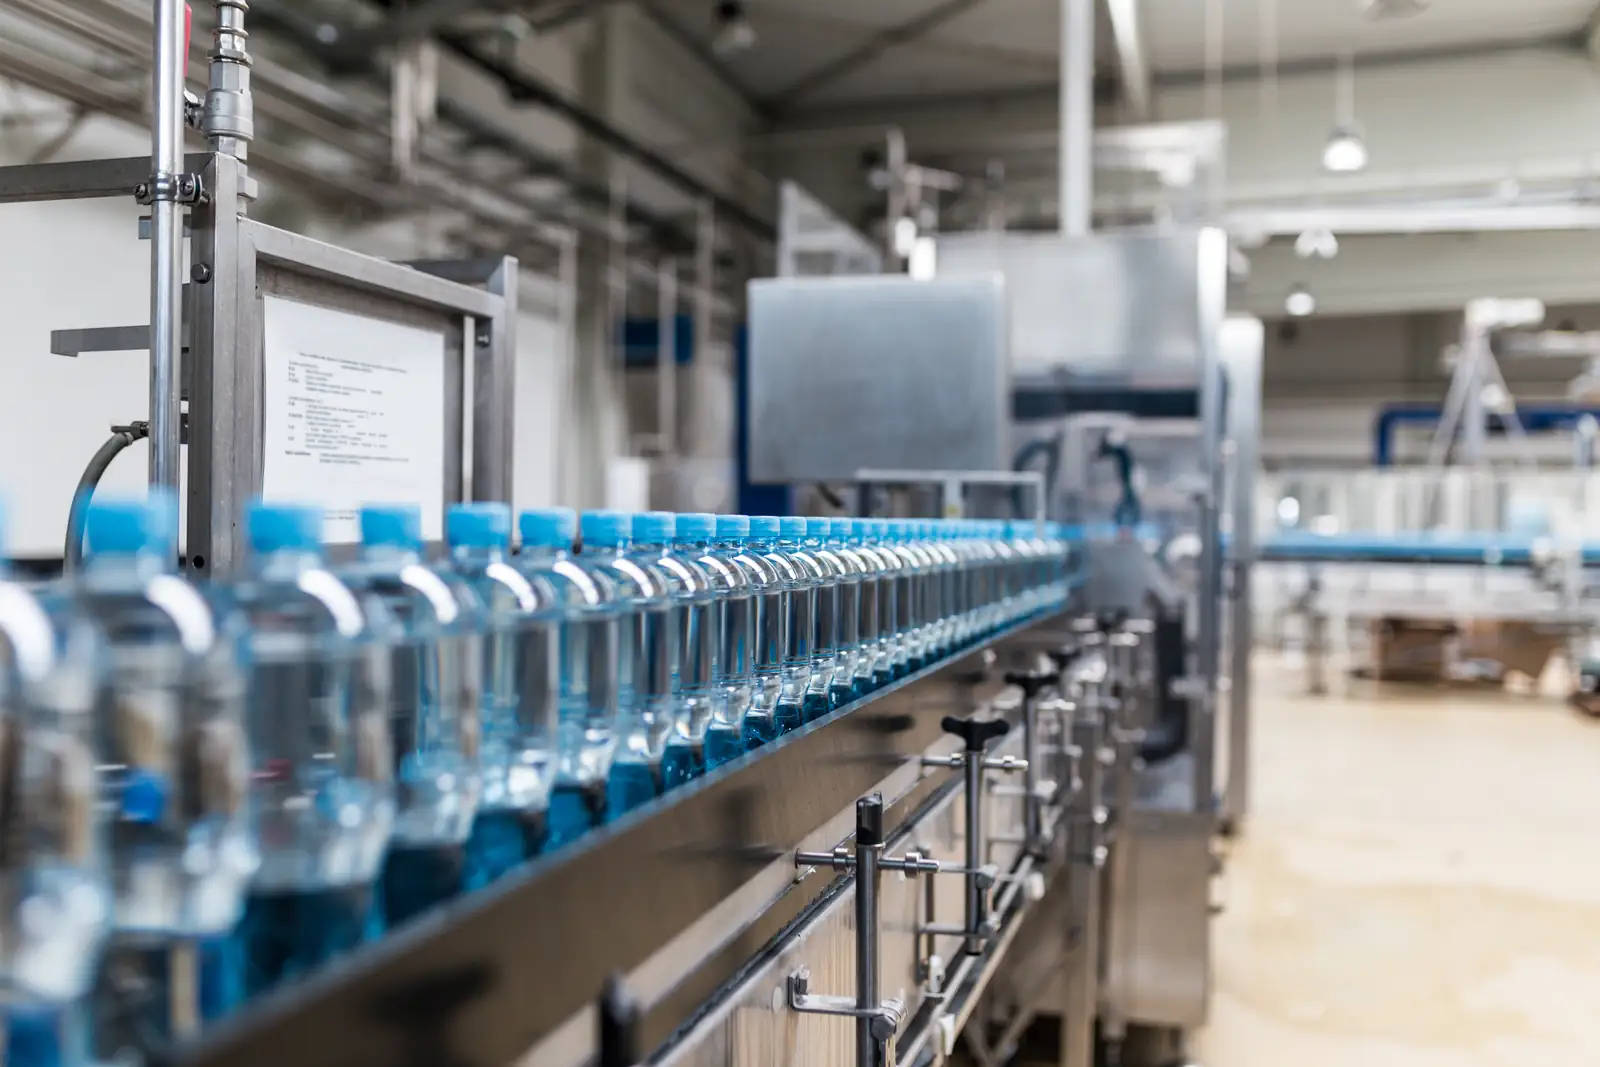 Bottling plant bottles of mineral water go through the process